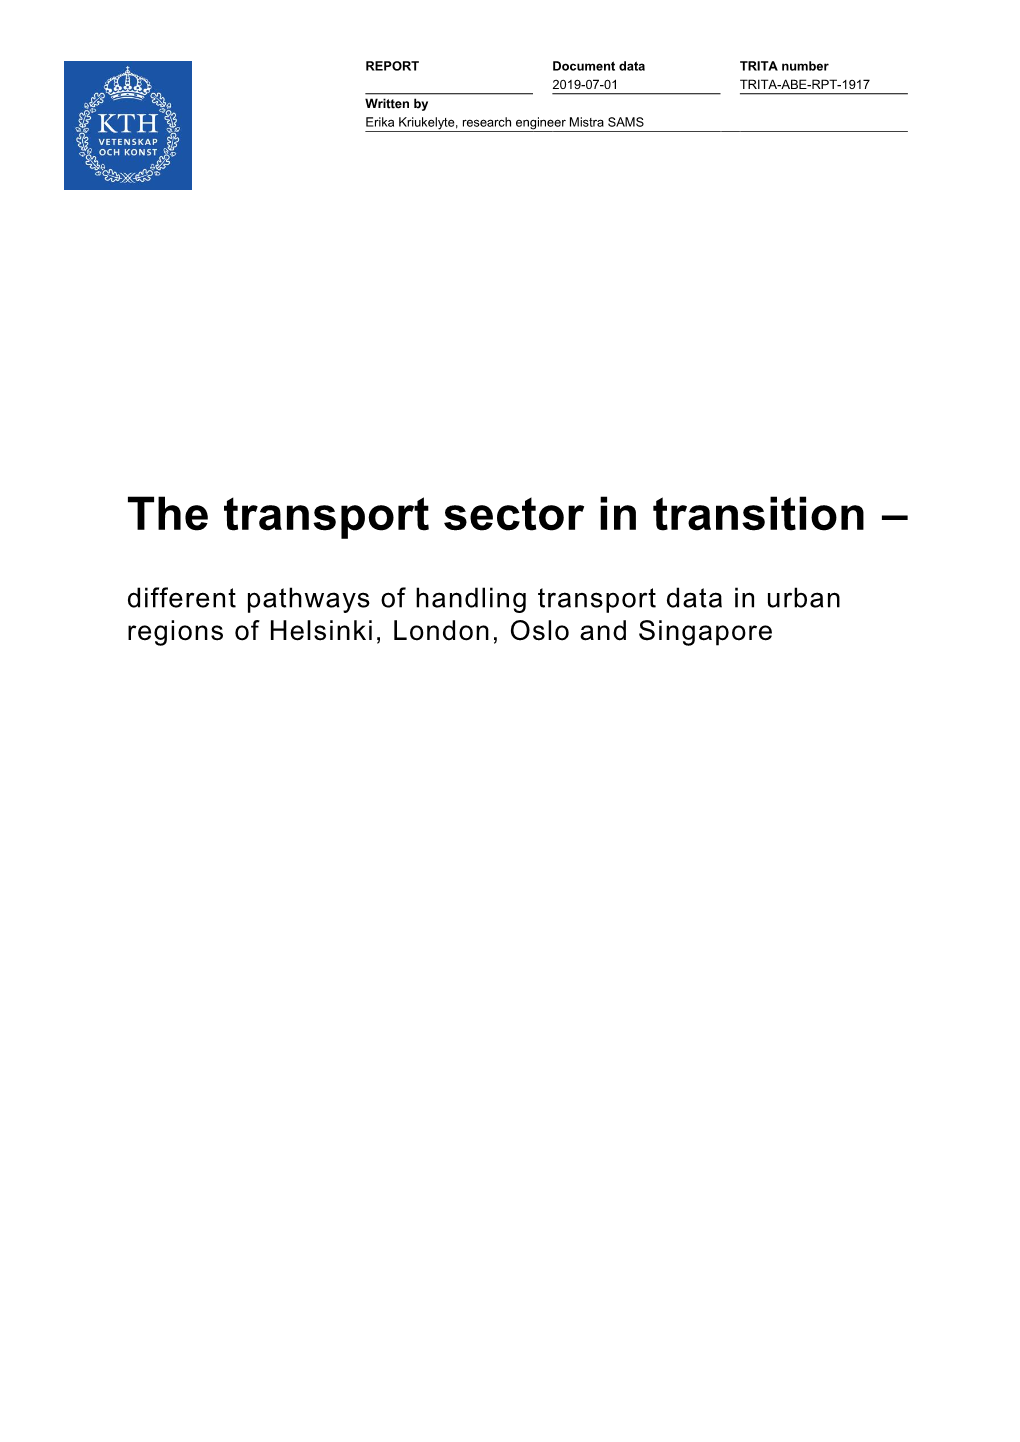 The Transport Sector in Transition – Different Pathways of Handling Transport Data in Urban Regions of Helsinki, London, Oslo and Singapore